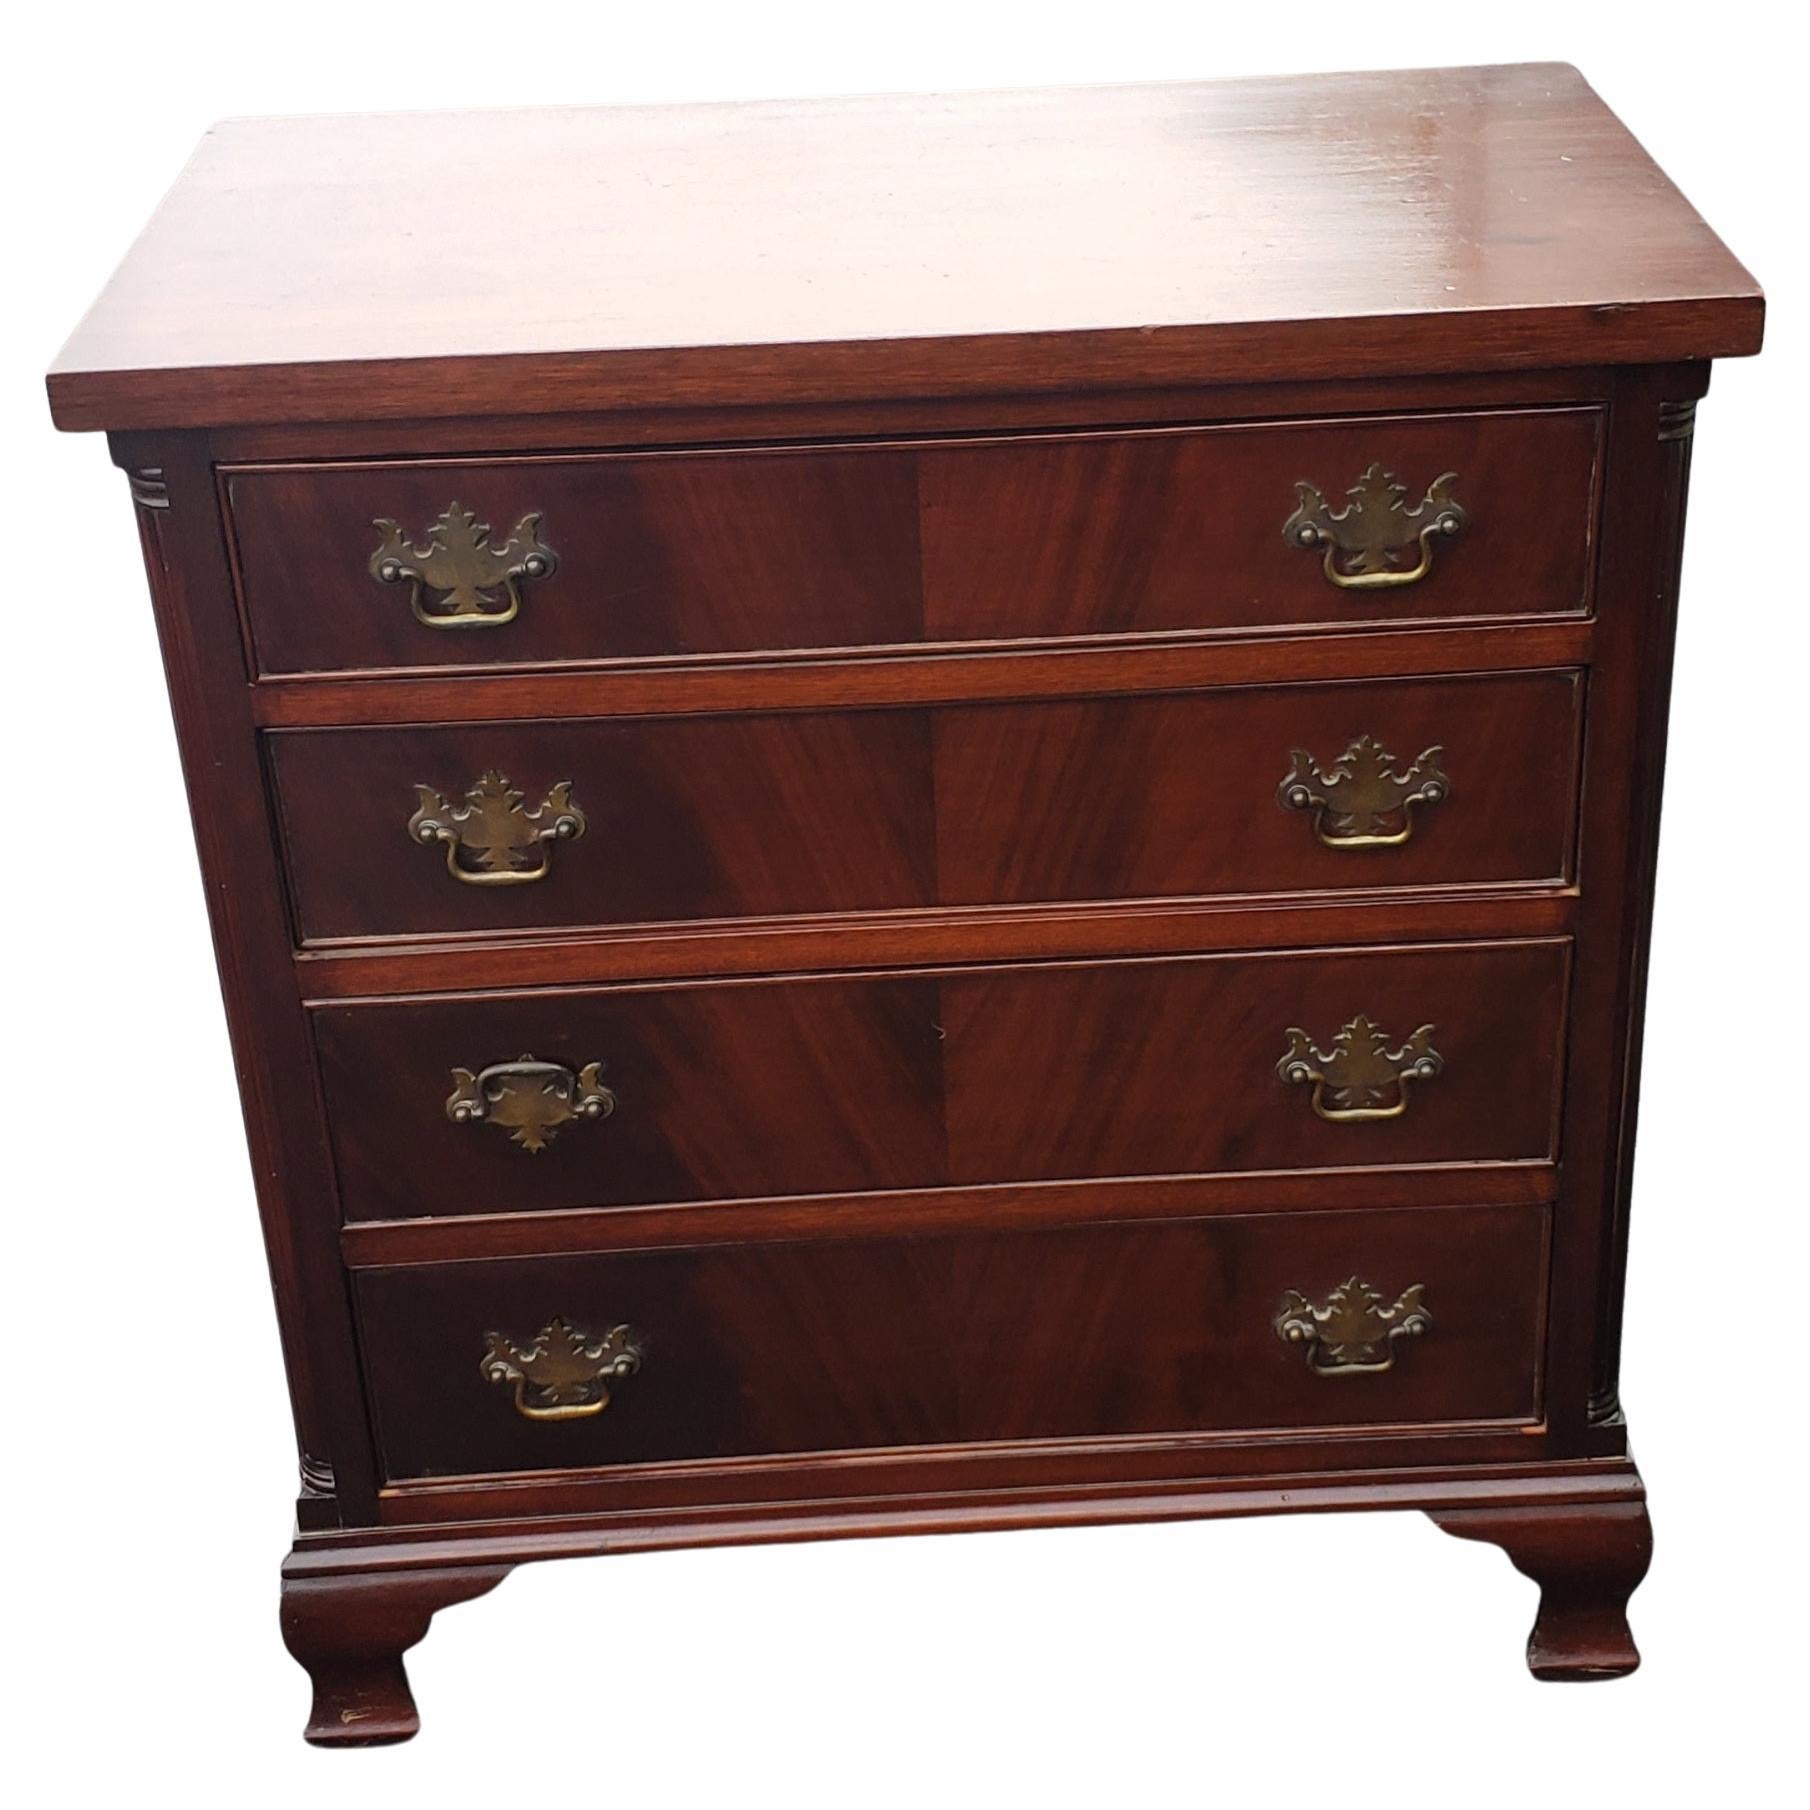 Recently refinished antique George III flame mahogany 4 drawer bachelor chest. 
Measures 29